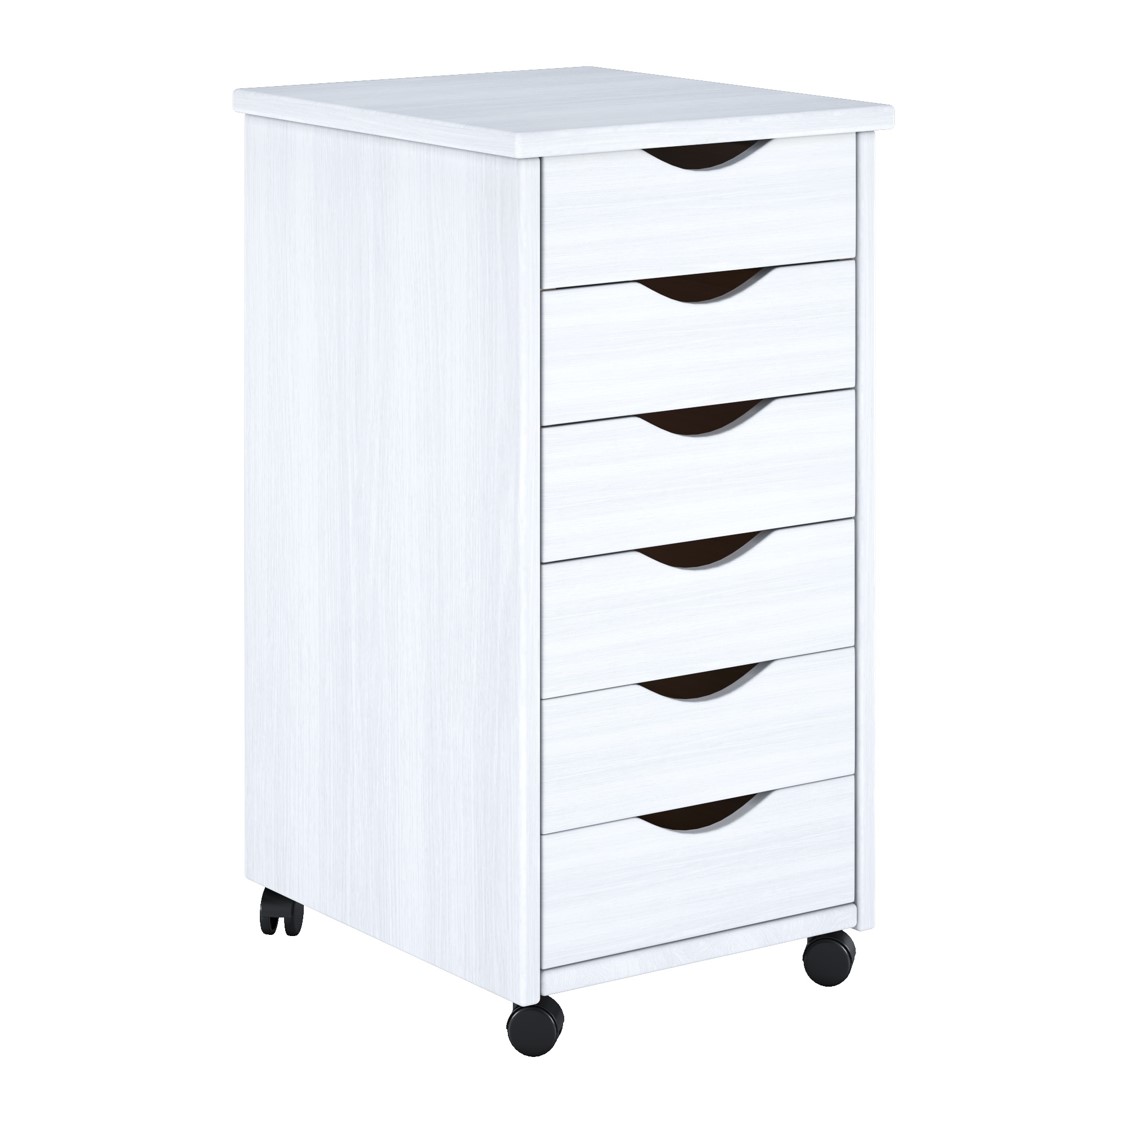 Adeptus Original Roll Cart, Solid Wood, 6 Drawer Roll Cart, White  (13.4" L x 15.4" W x 25.4" H) - image 1 of 9